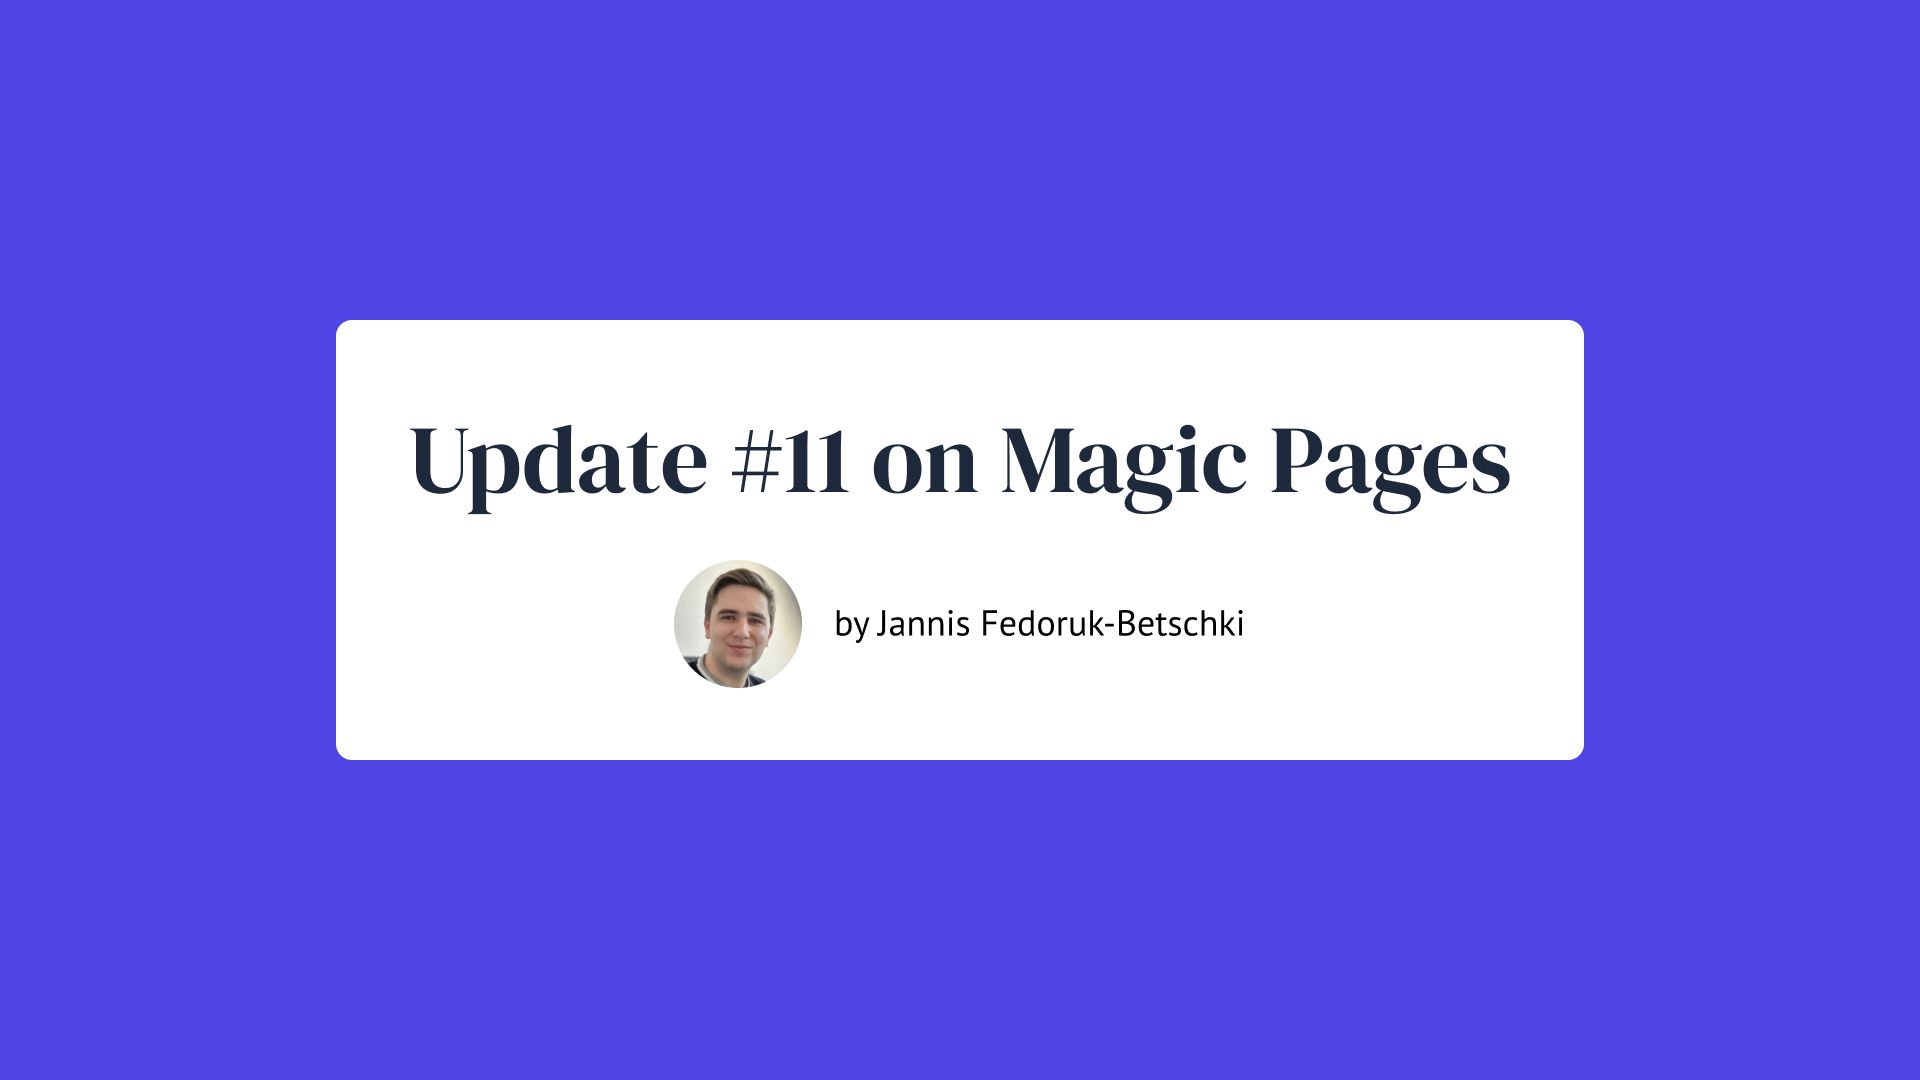 Update #11 on Magic Pages